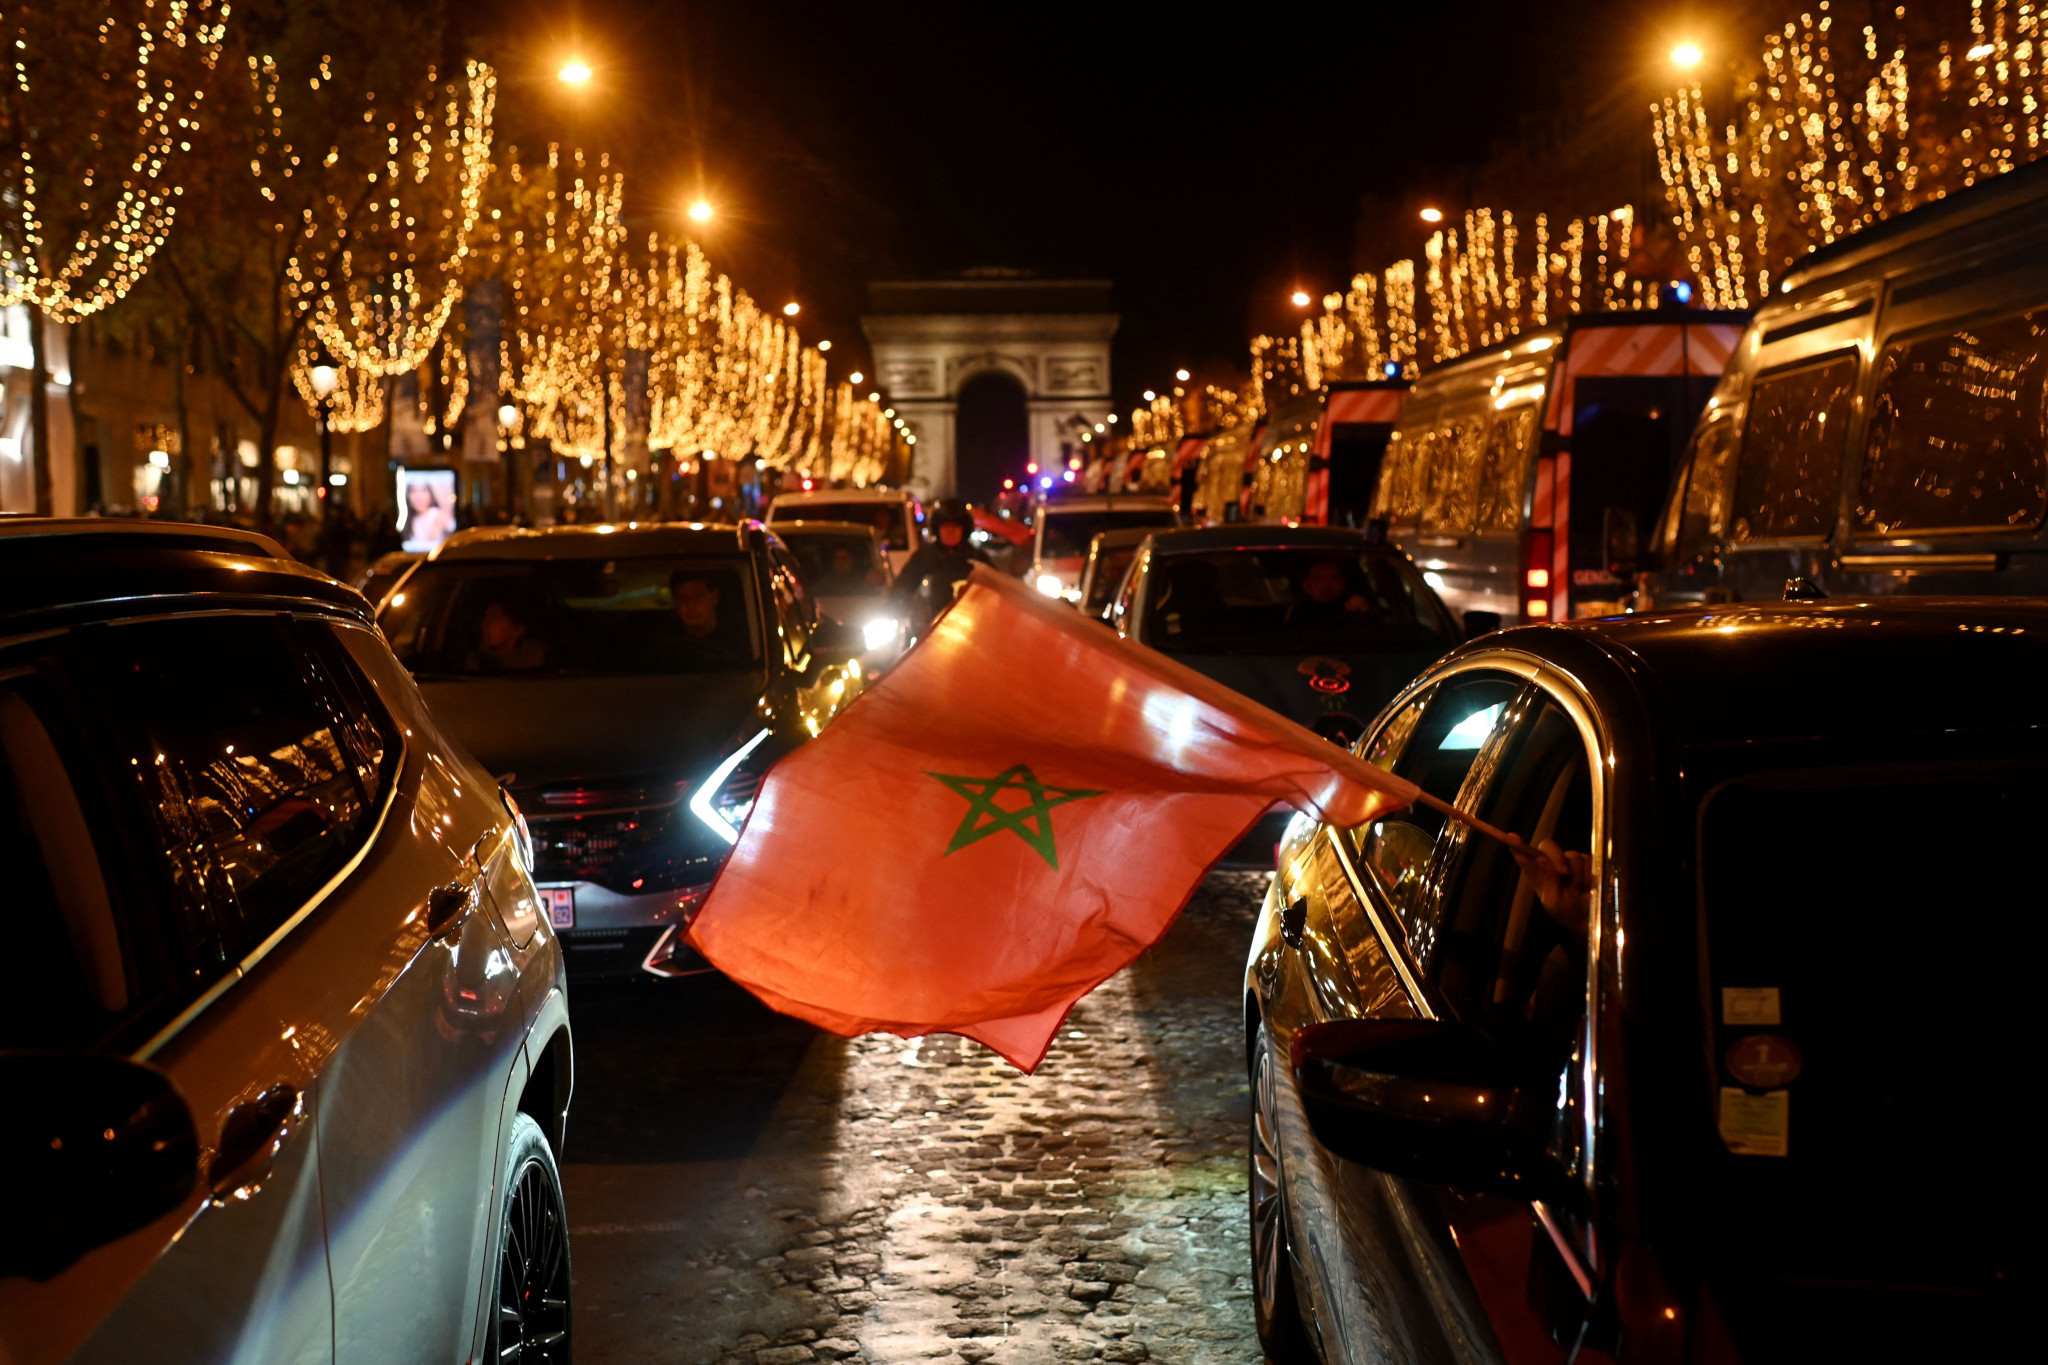 Tear gas fired on Champs-Élysées after Moroccan and French World Cup wins